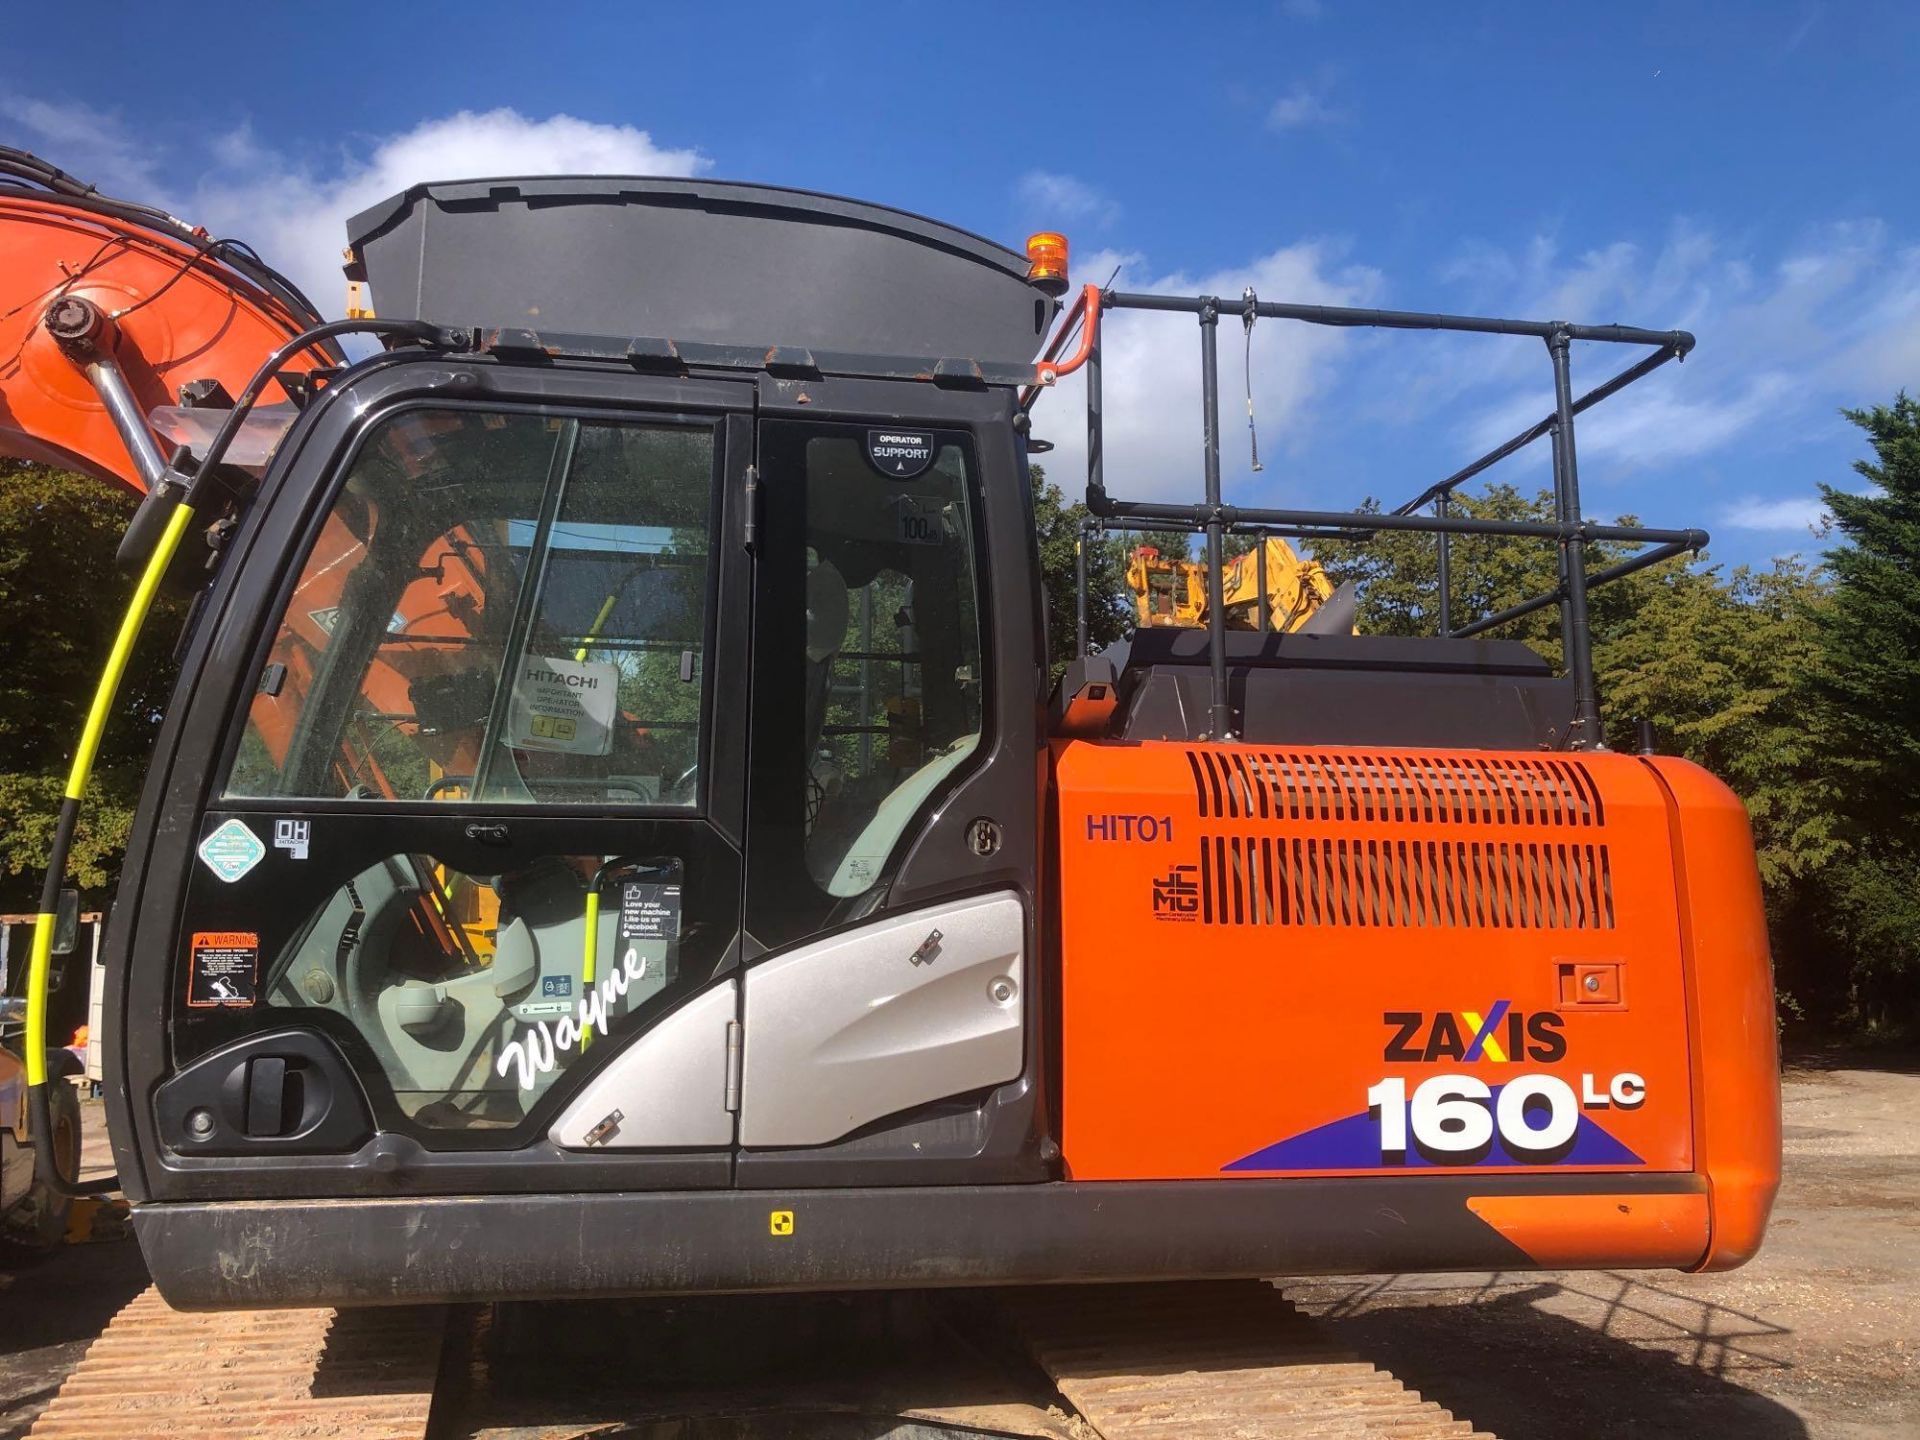 Hitachi ZX160LC-6 WCL No HIT01 16 tonne Crawler Excavator 2262 recorded hours serial number - Image 2 of 13